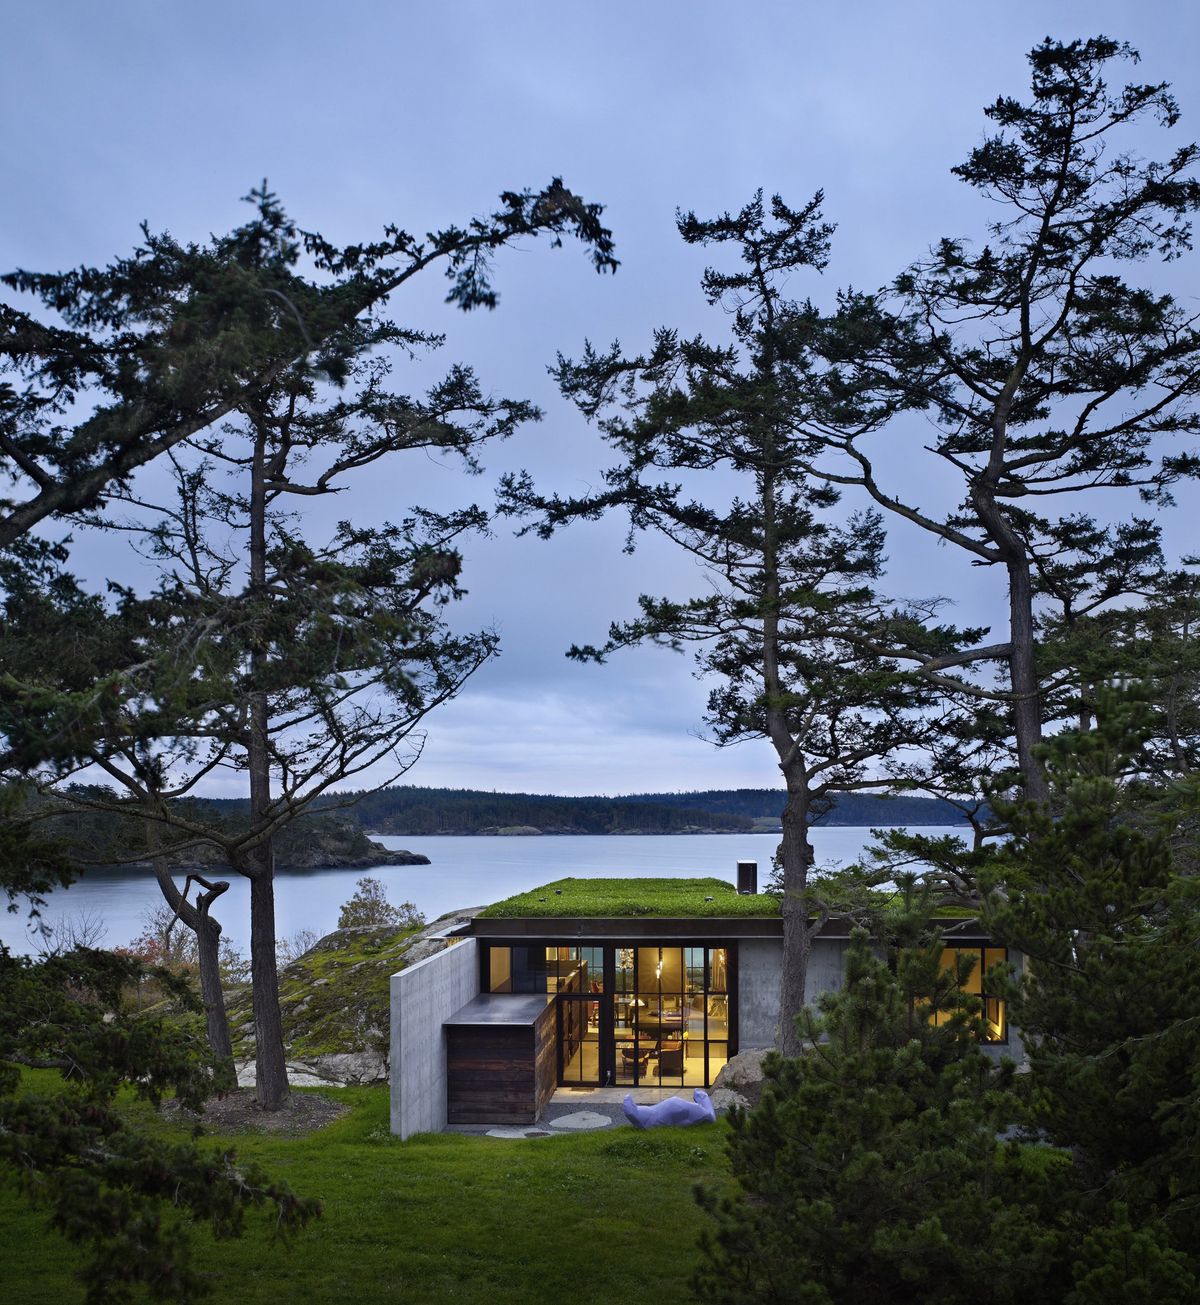 Architect Tom Kundig tries to fit the houses he designs naturally into the landscape such as “The Pierre” on Lopez Island in Western Washington’s San Juan Islands.